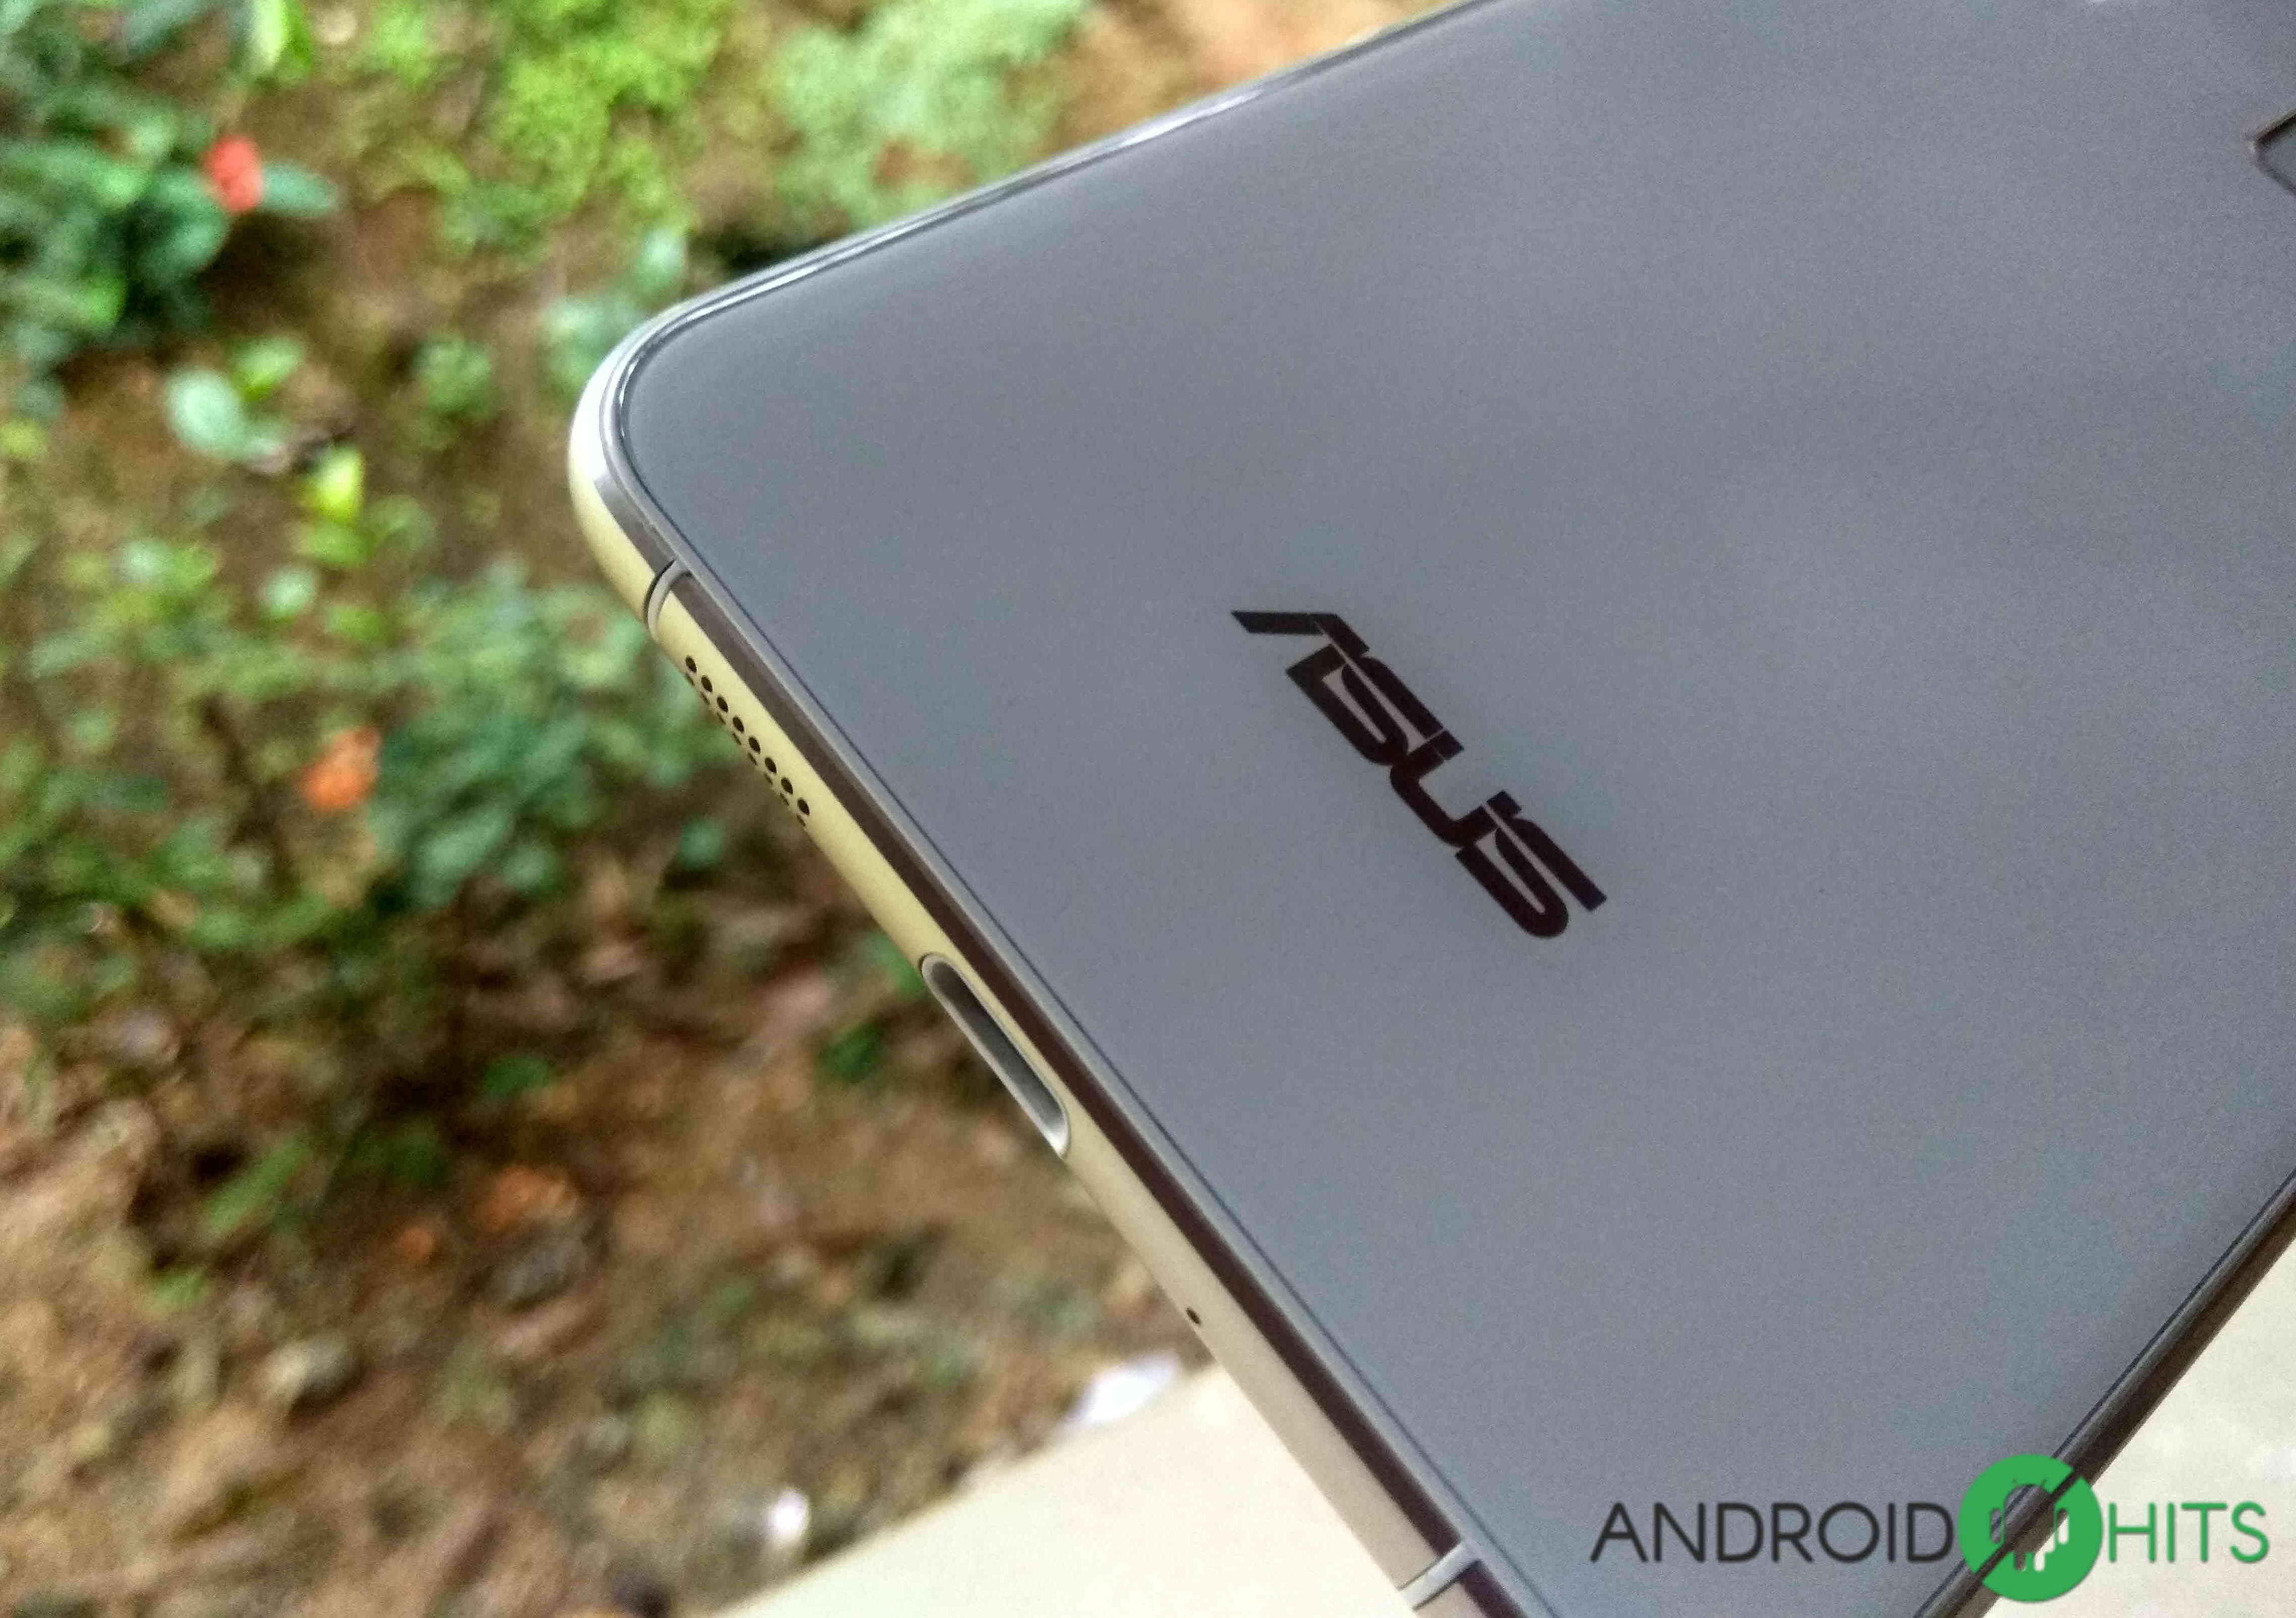 ASUS Zenfone 3 price slashed in India, now available from Rs. 17,999 1